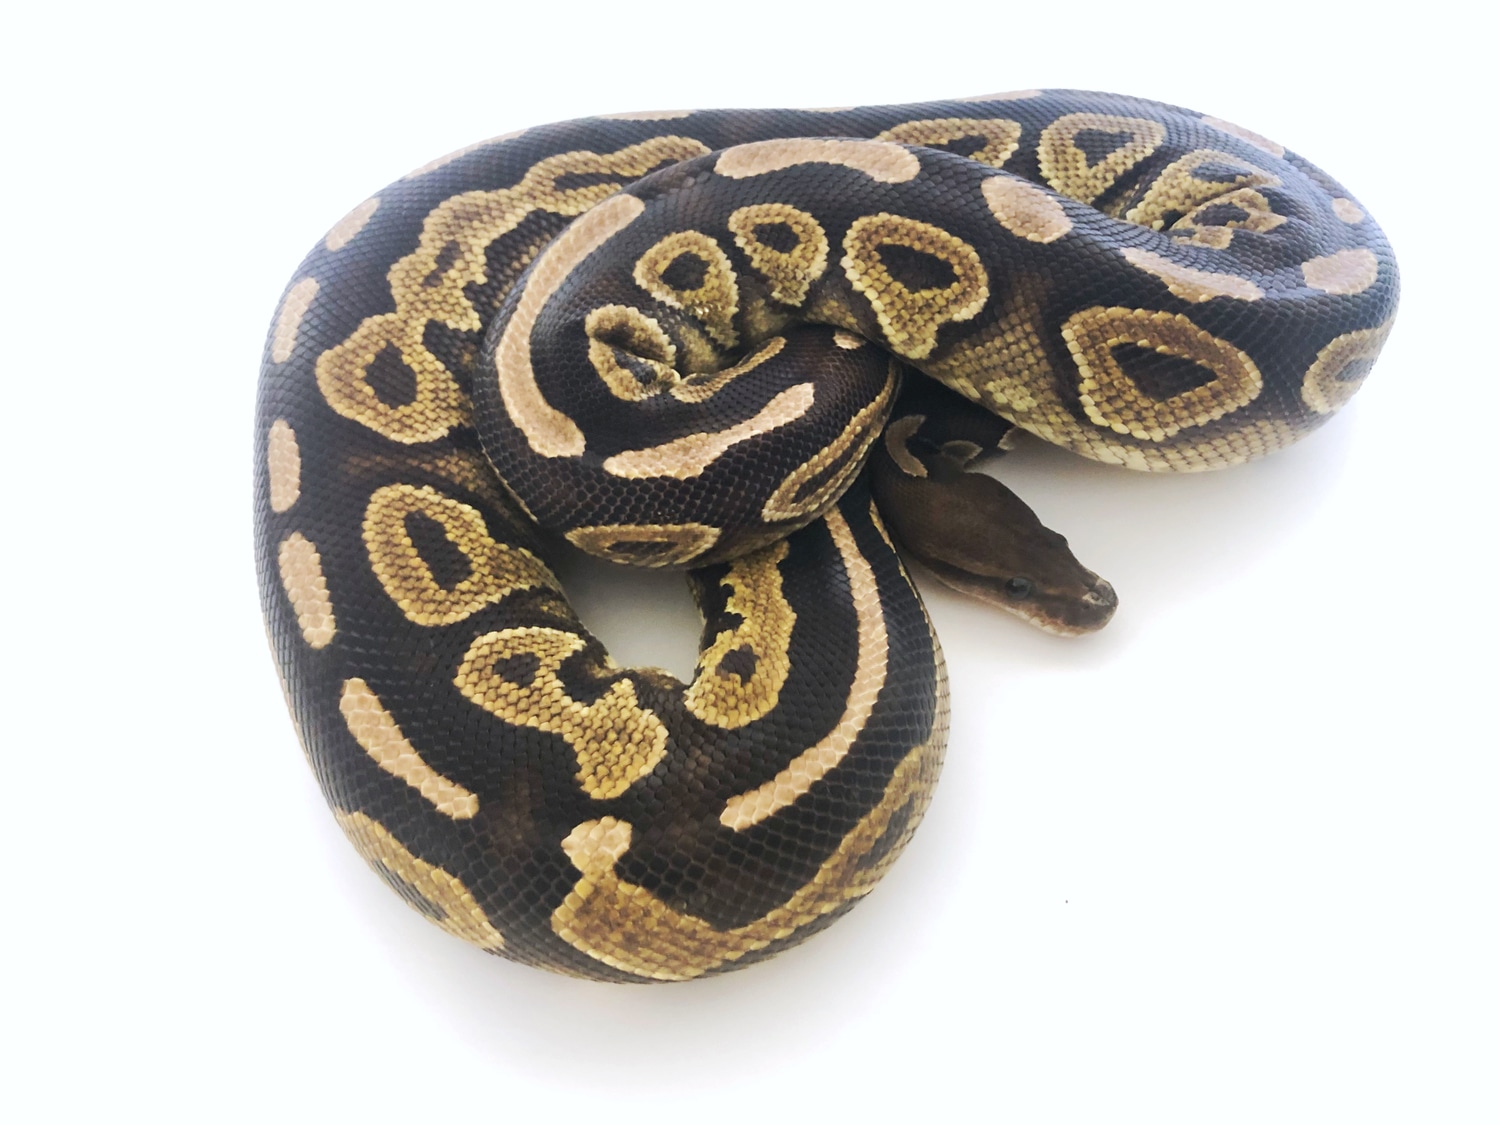 2011 Black Pastel Ball Python by Comer's Constrictors